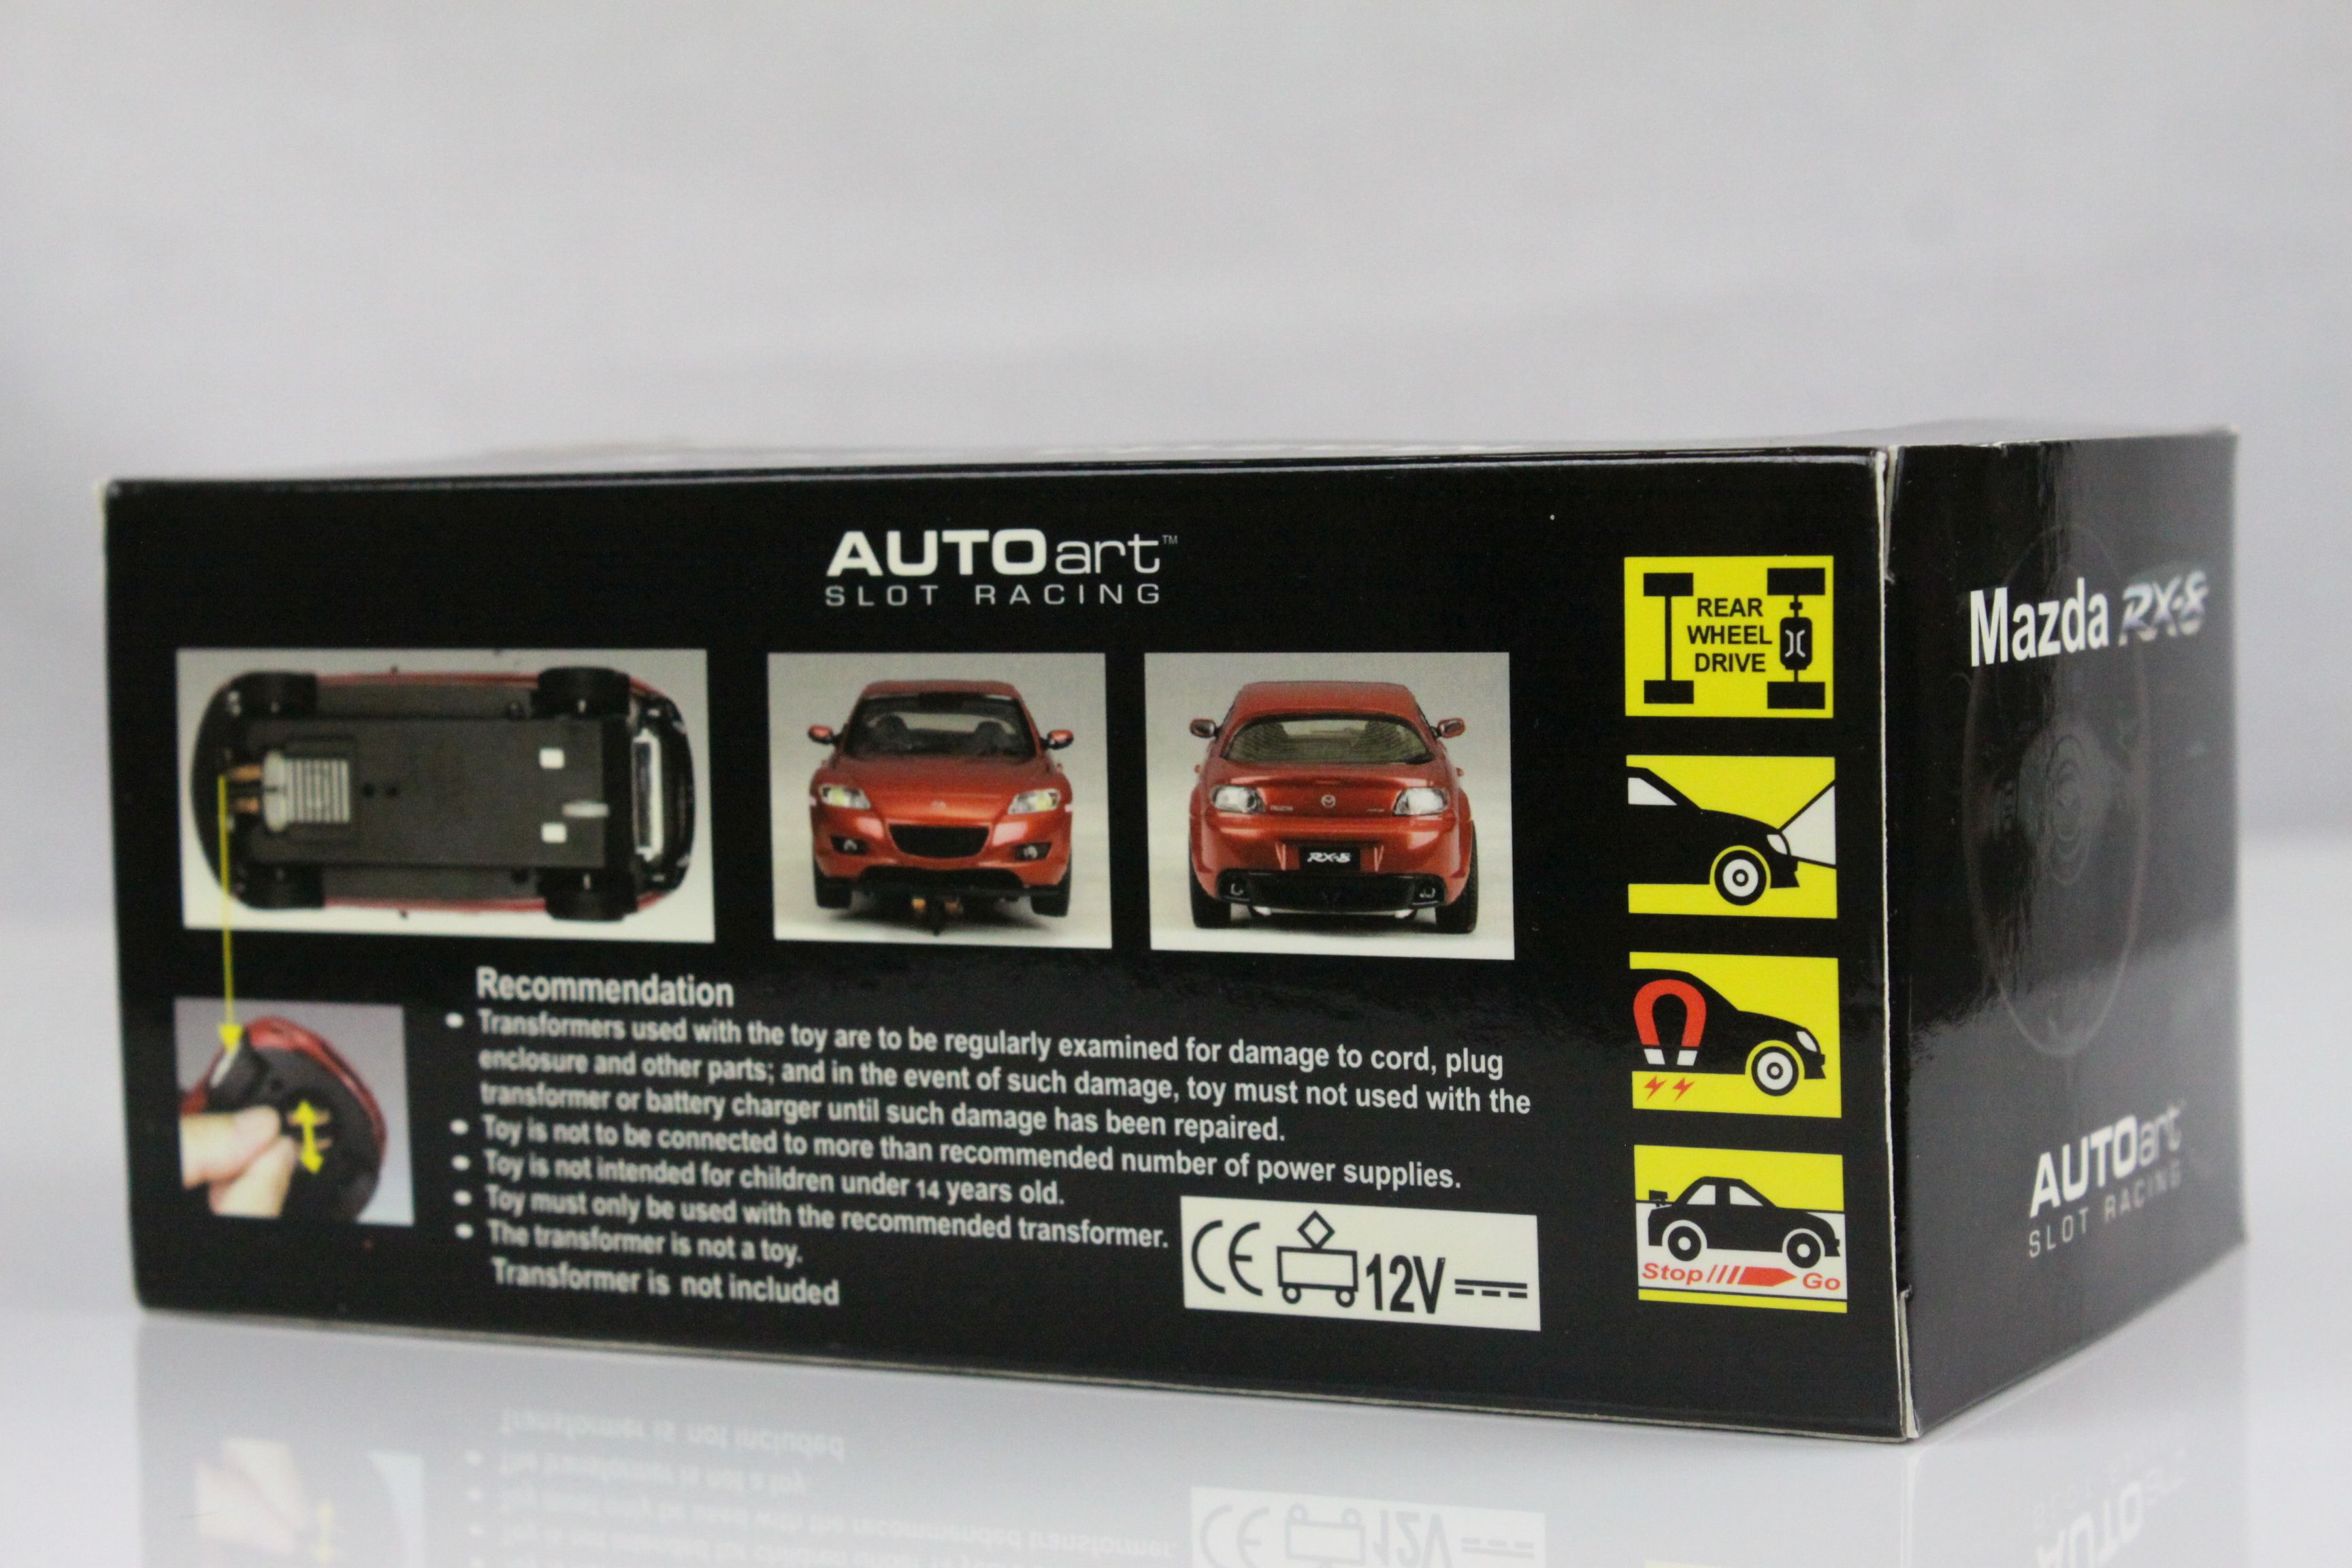 Four cased slot cars to include 3 x Auto Art Slot Racing featuring 13032 Mazda RX-8 (Velocity - Image 25 of 35